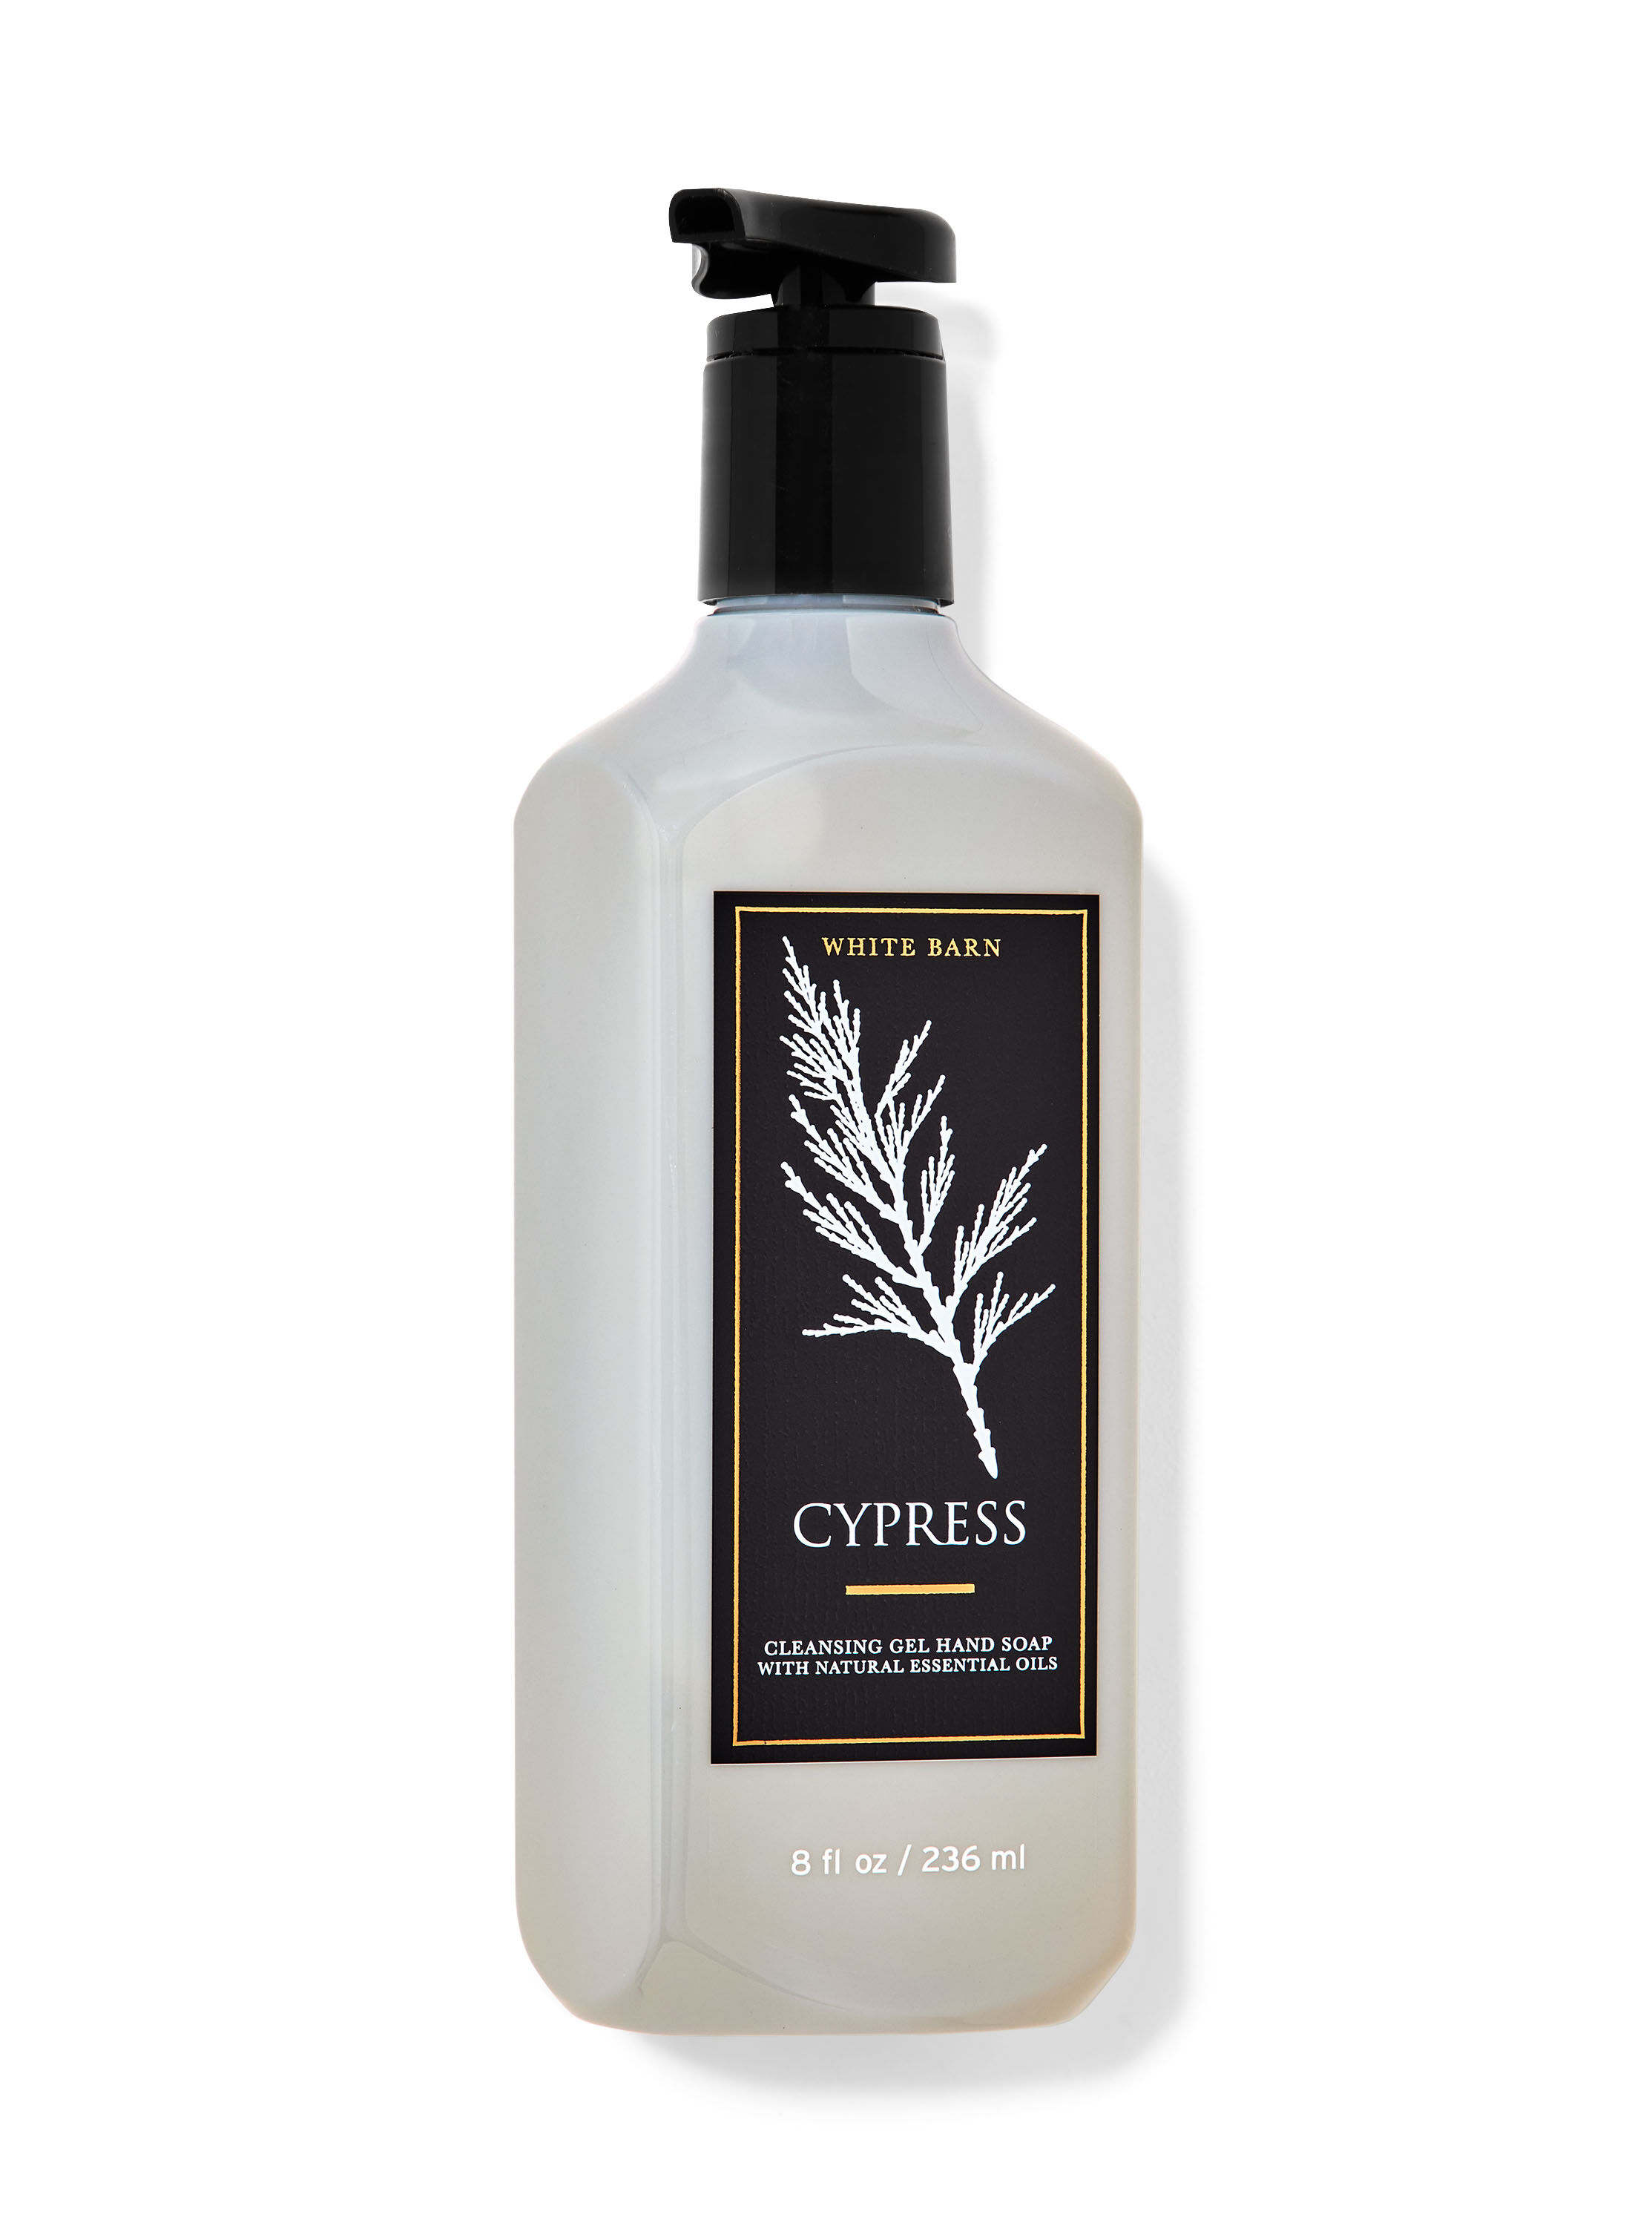 Cypress Cleansing Gel Hand Soap